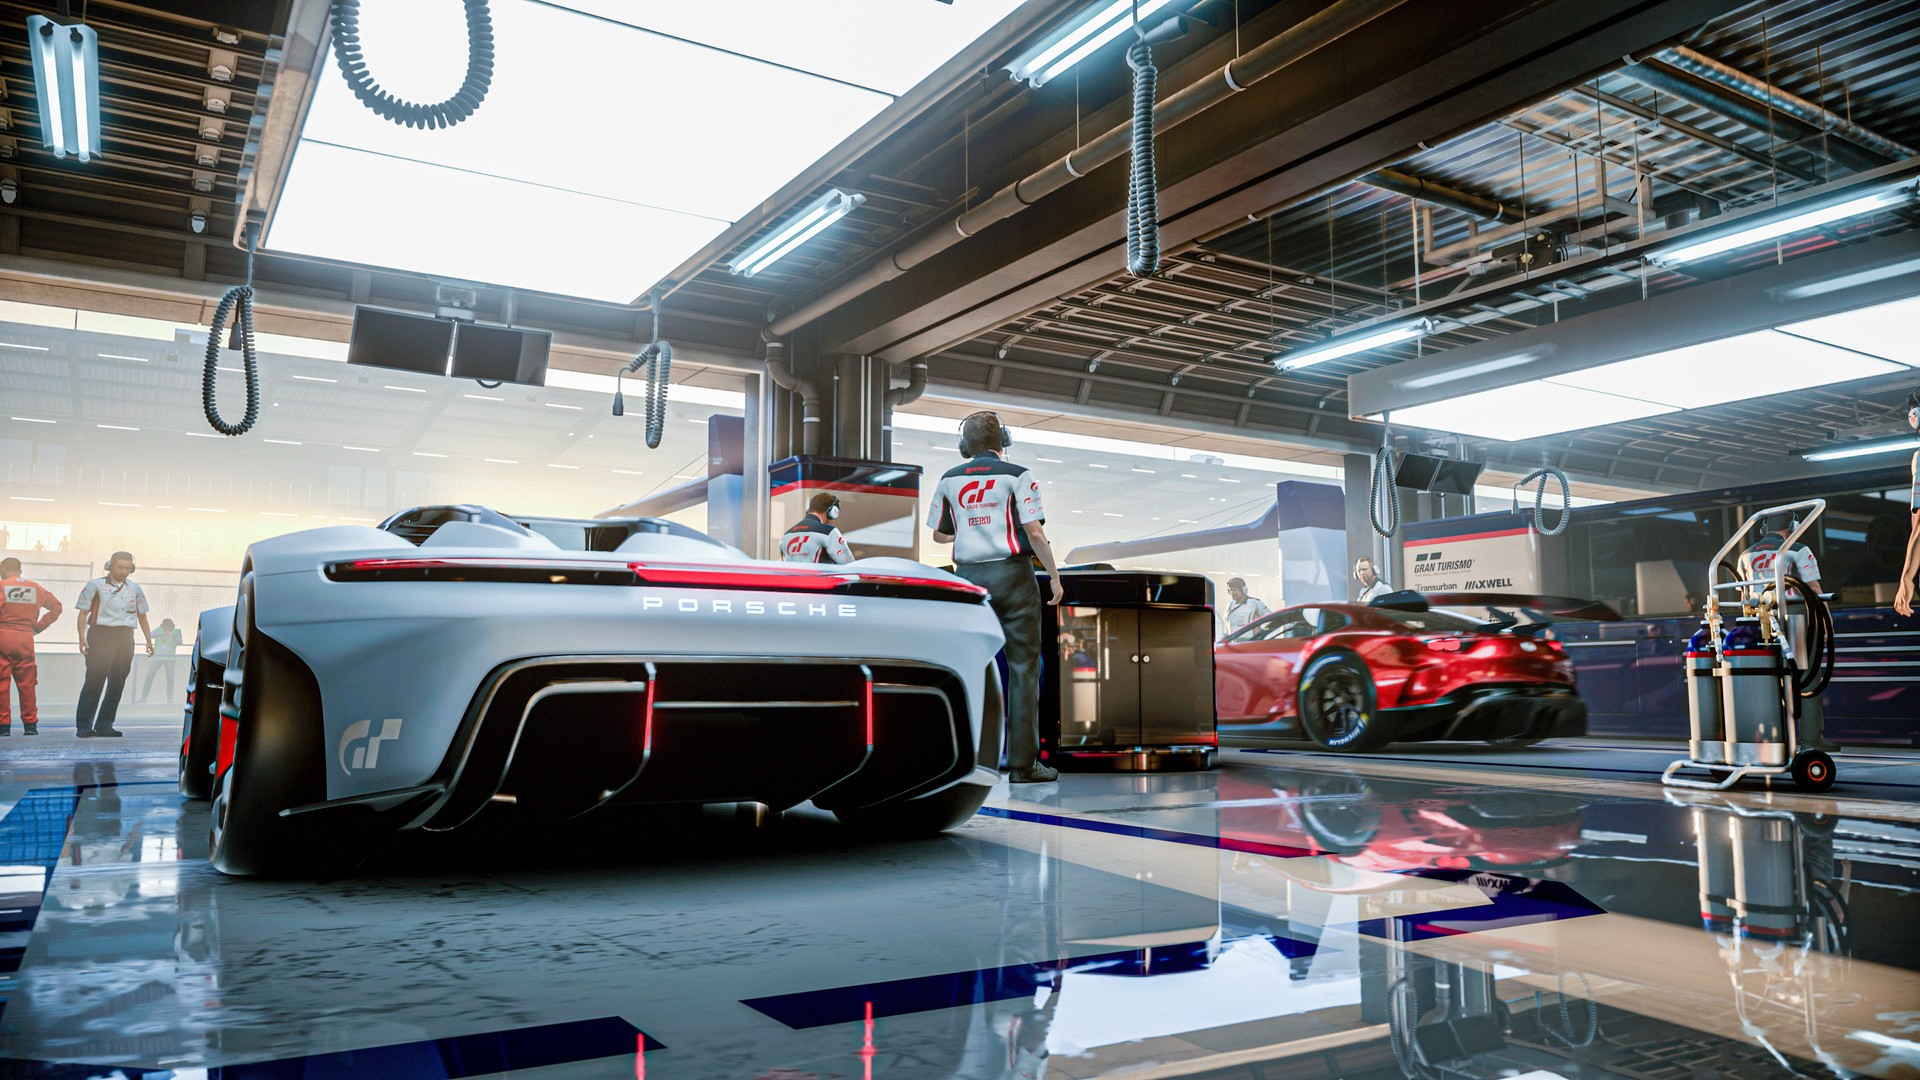 Gran Turismo 7 will be a showcase of car culture and PS5 horsepower - CNET